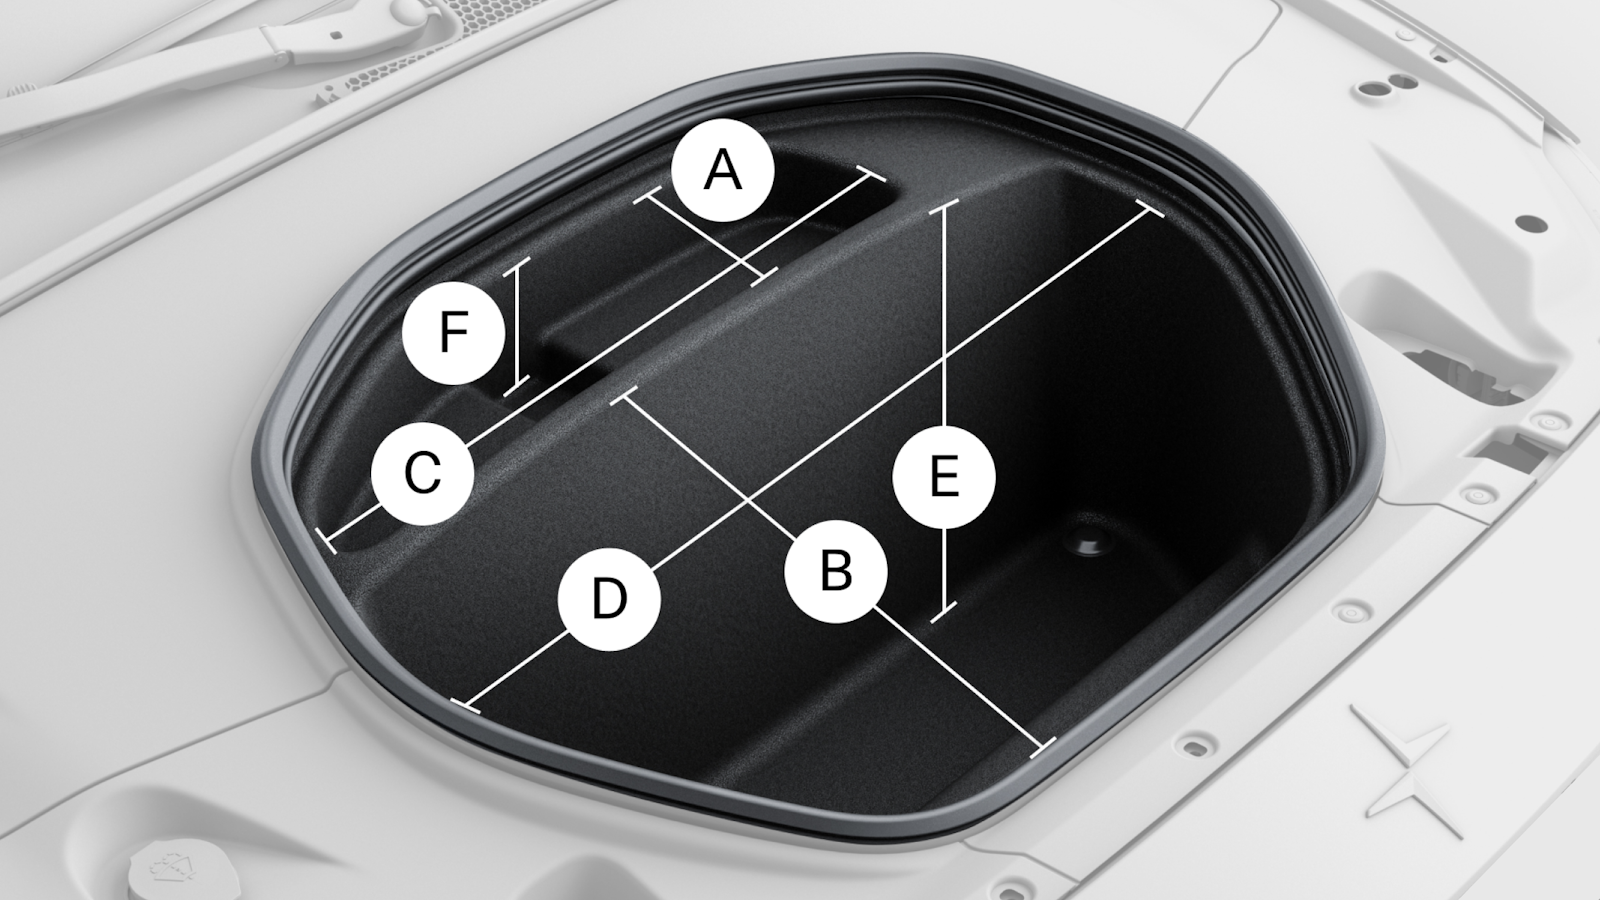 Image of the storage dimensions of the frunk / front trunk